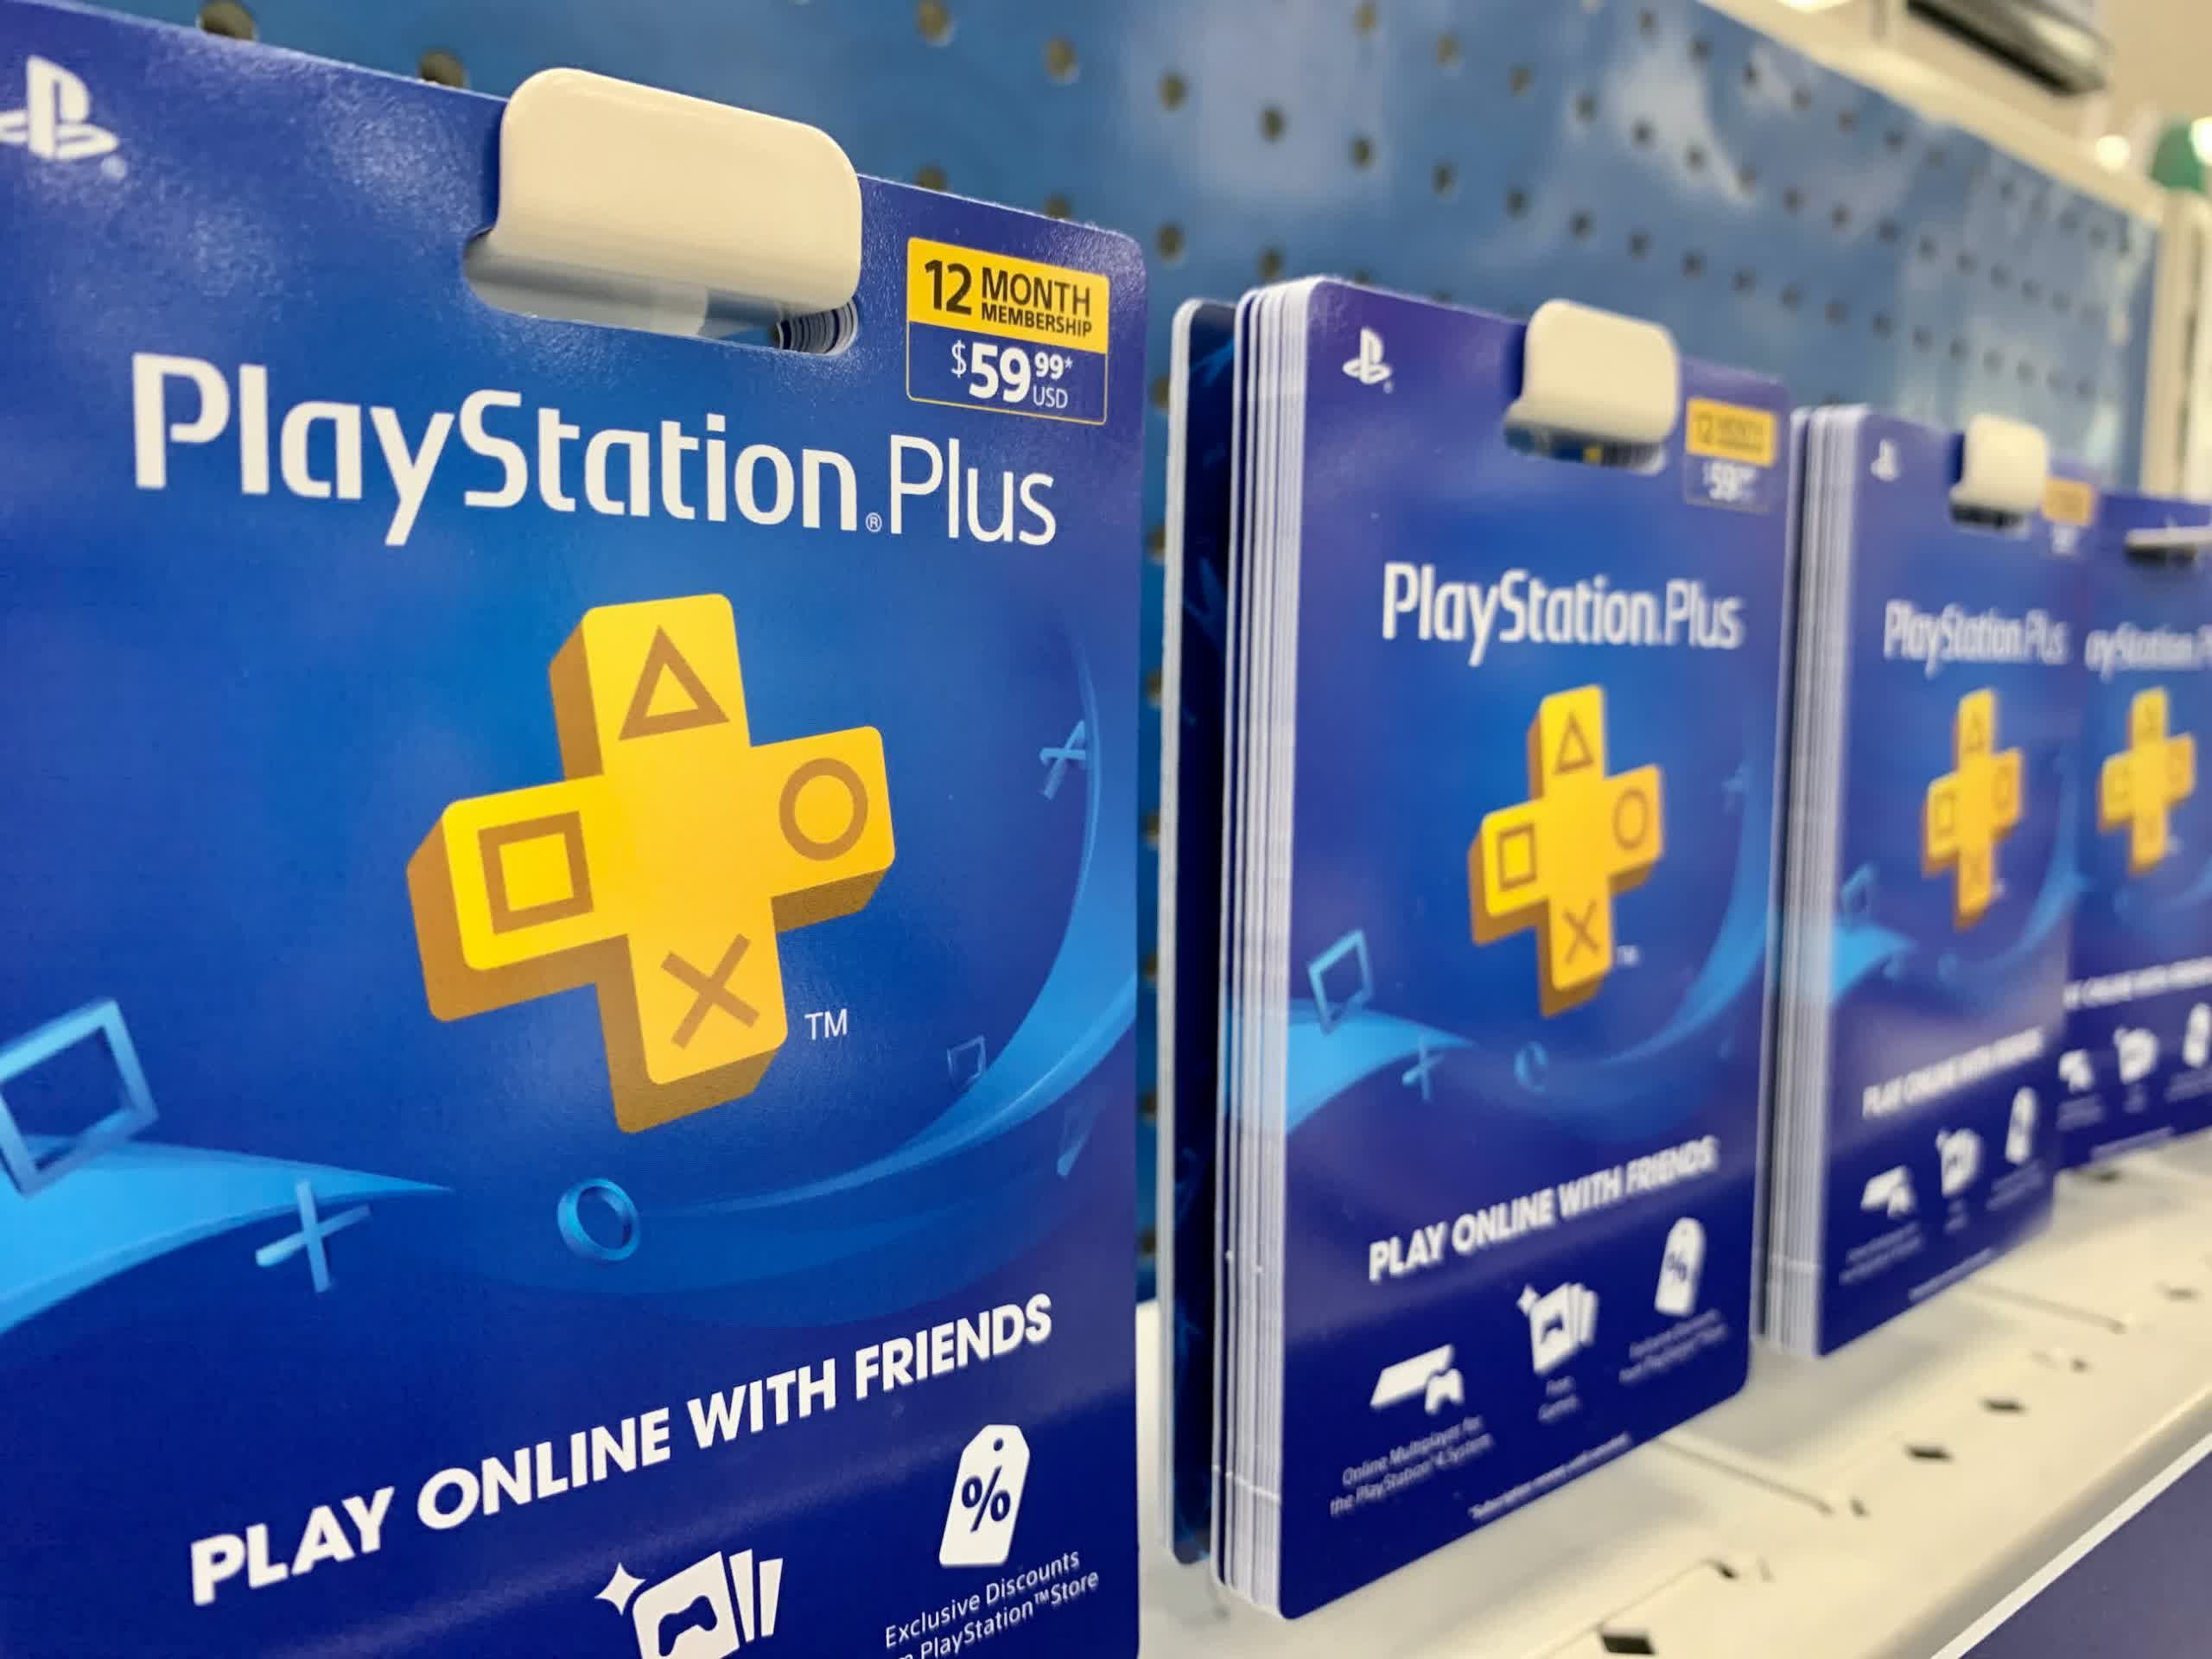 Two free games per console is returning to PlayStation Plus members again